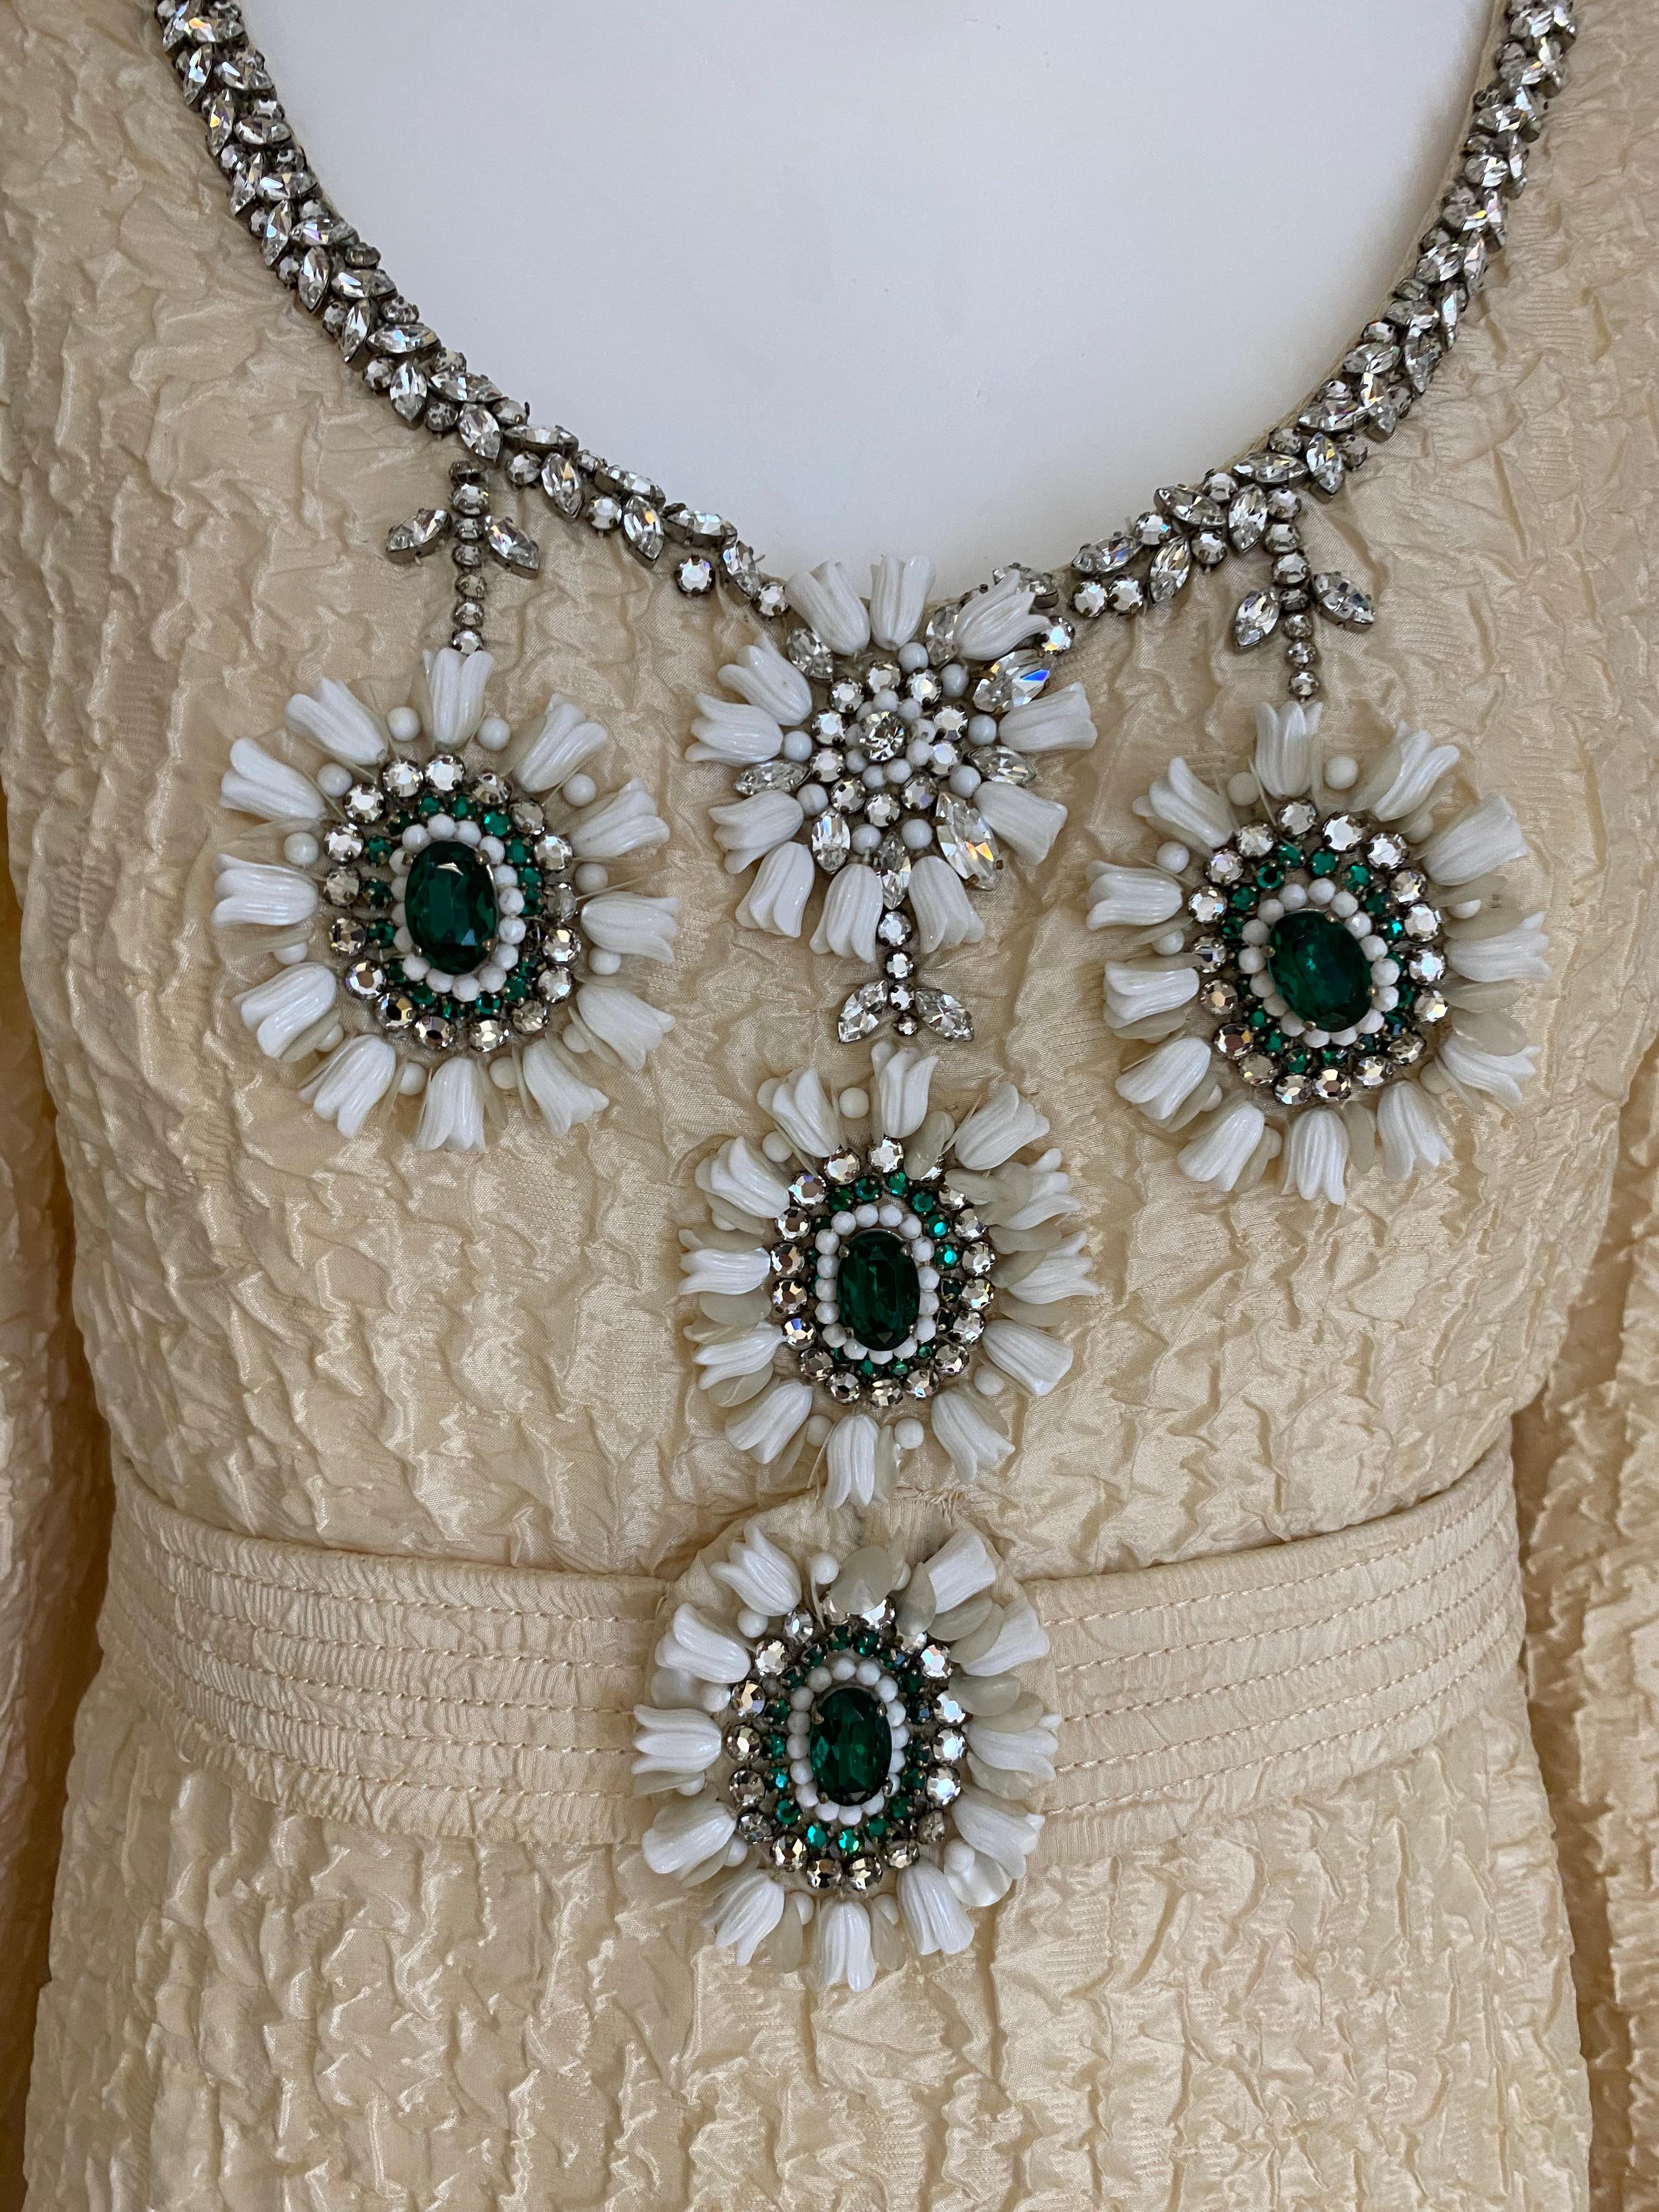 1960s James Galanos from Amelia Gray Boutique Creme silk crinkle long sleeve dress embellished in green rhinestones and white beads.
Dress has some issues on the arm pit . ( see image attached) For Design purpose or study.
Size 2